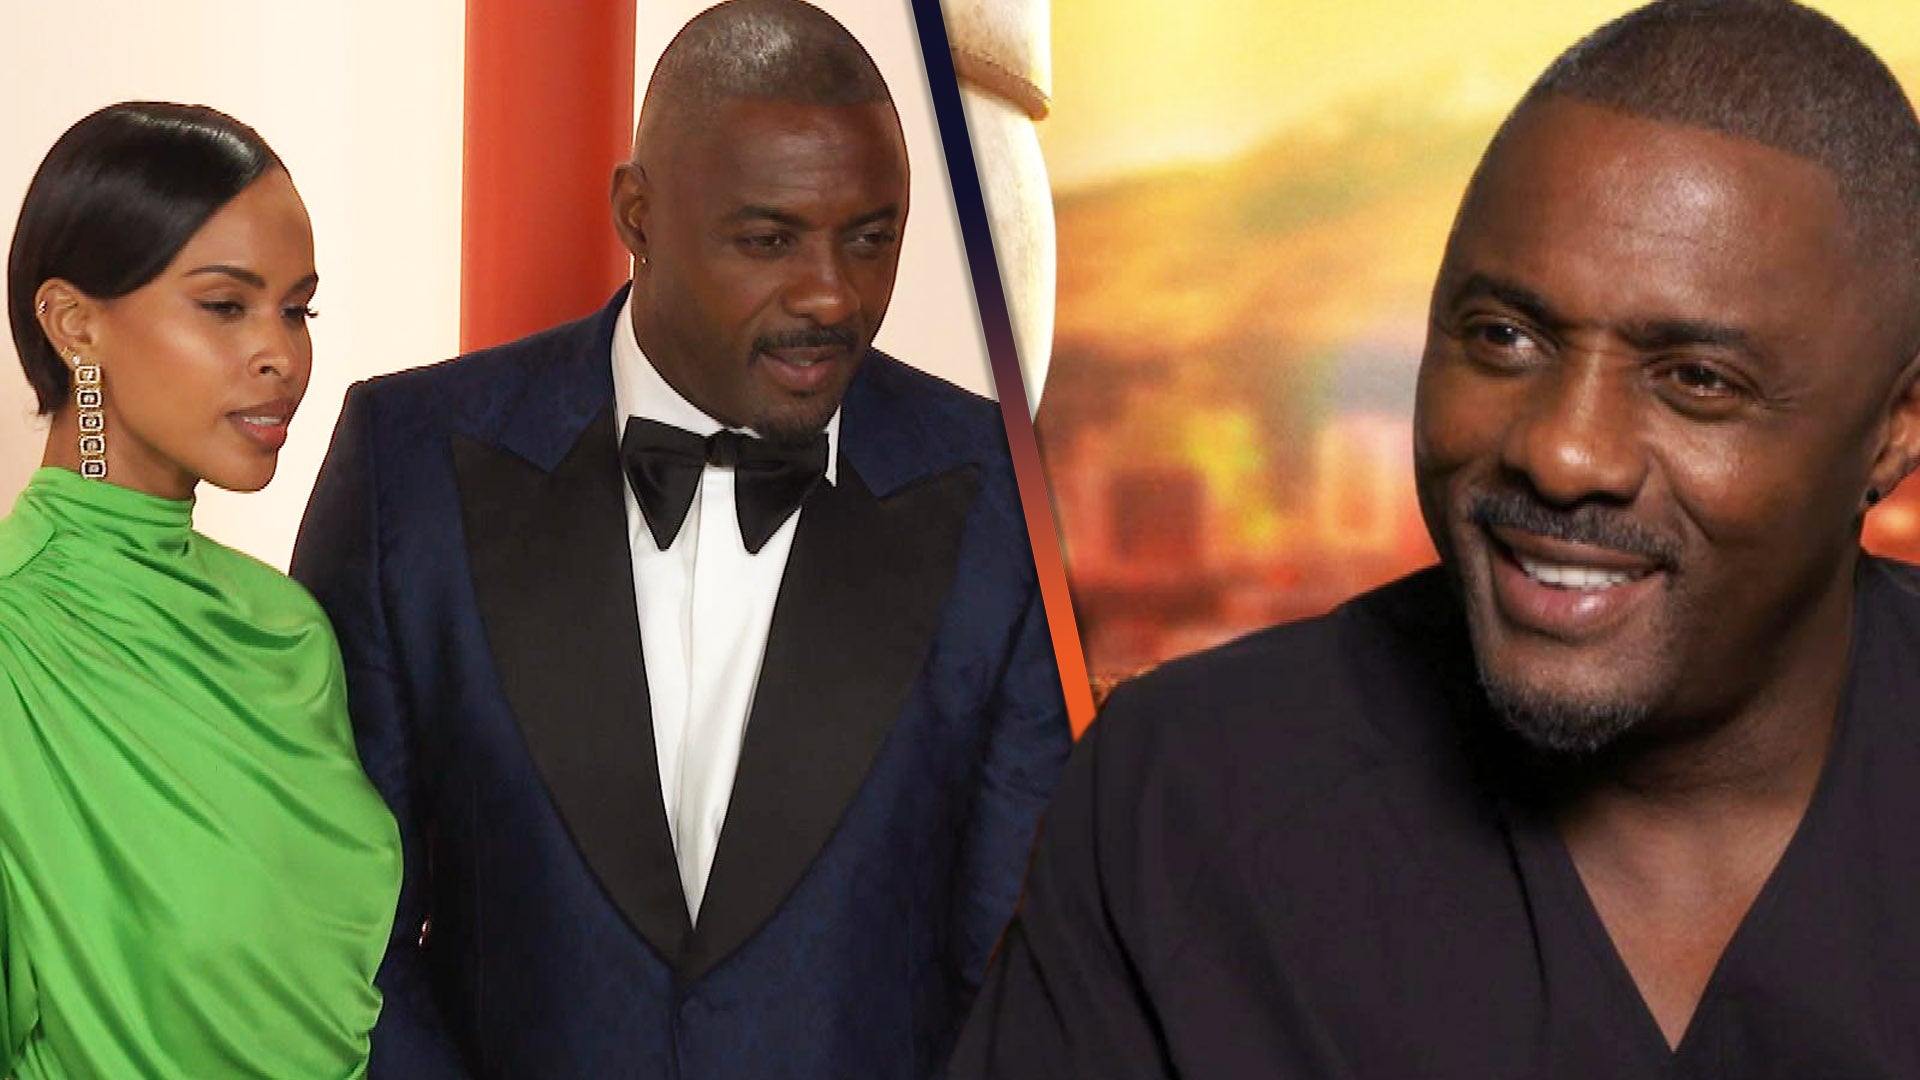 Idris Elba on His 'Really Special' Plans for Their 5-Year Wedding Anniversary (Exclusive)